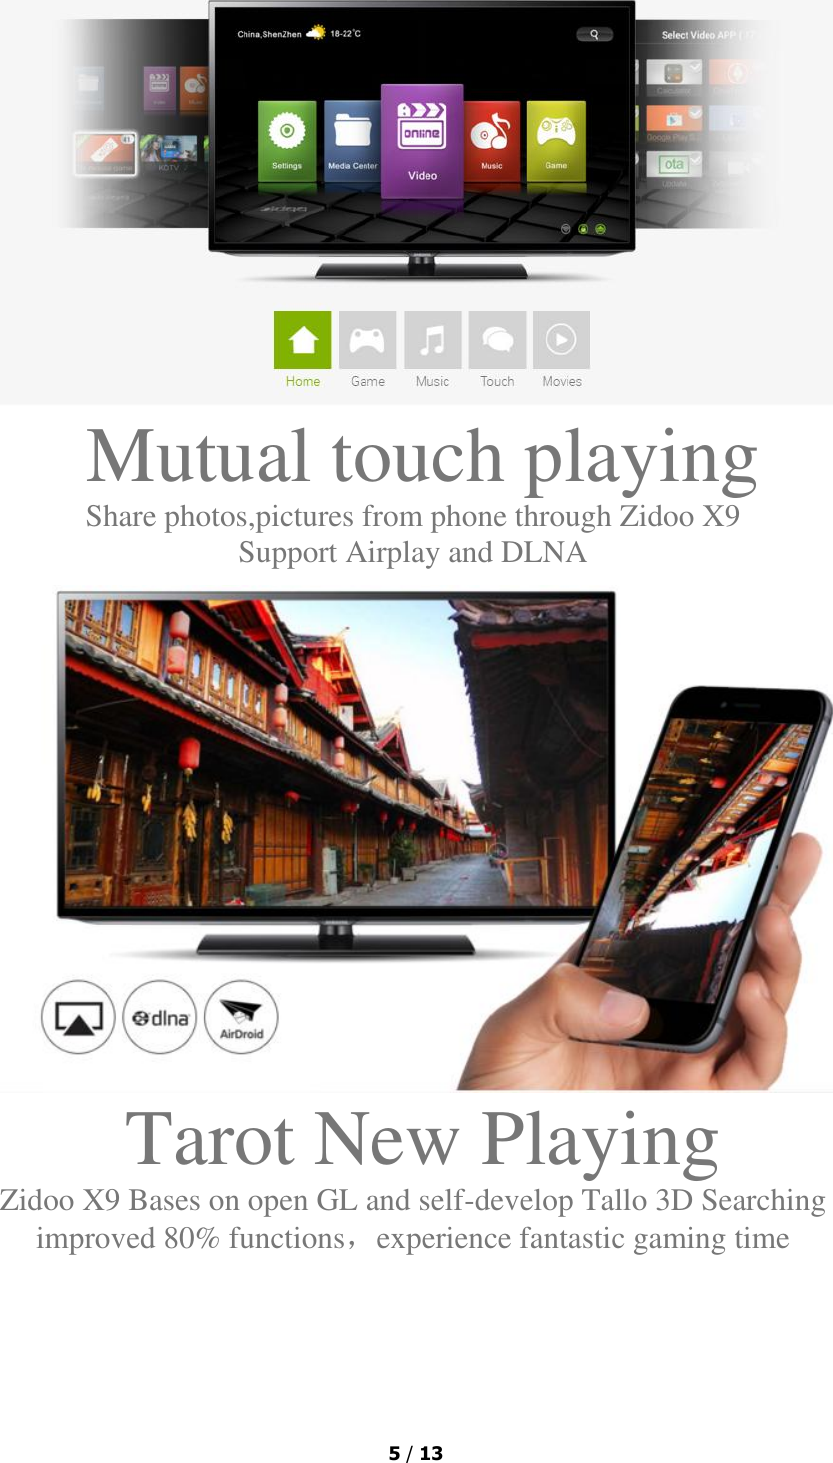  5 / 13   Mutual touch playing Share photos,pictures from phone through Zidoo X9 Support Airplay and DLNA  Tarot New Playing Zidoo X9 Bases on open GL and self-develop Tallo 3D Searching improved 80% functions，experience fantastic gaming time 